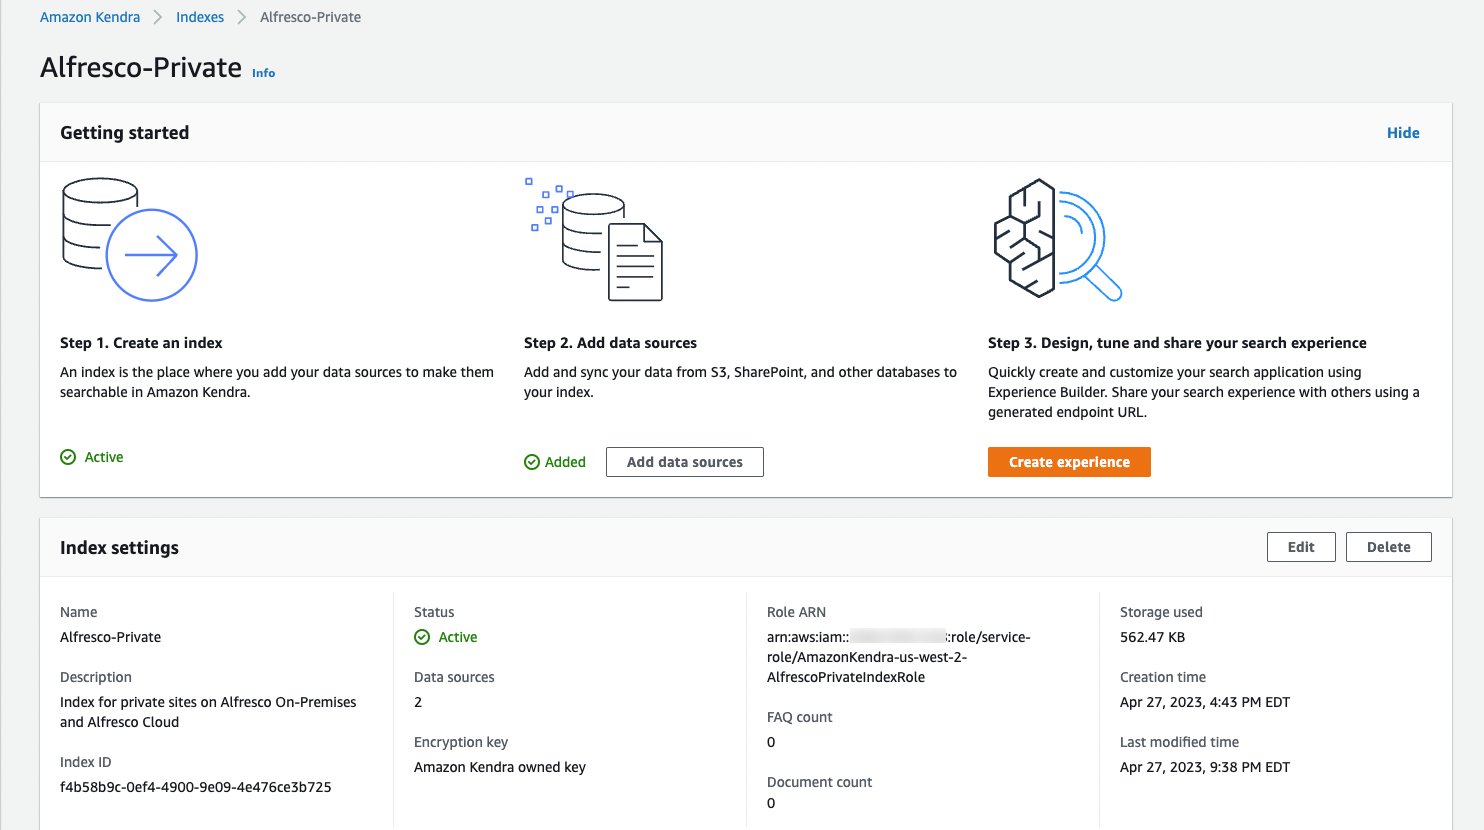 Index your Alfresco content using the new Amazon Kendra Alfresco connector